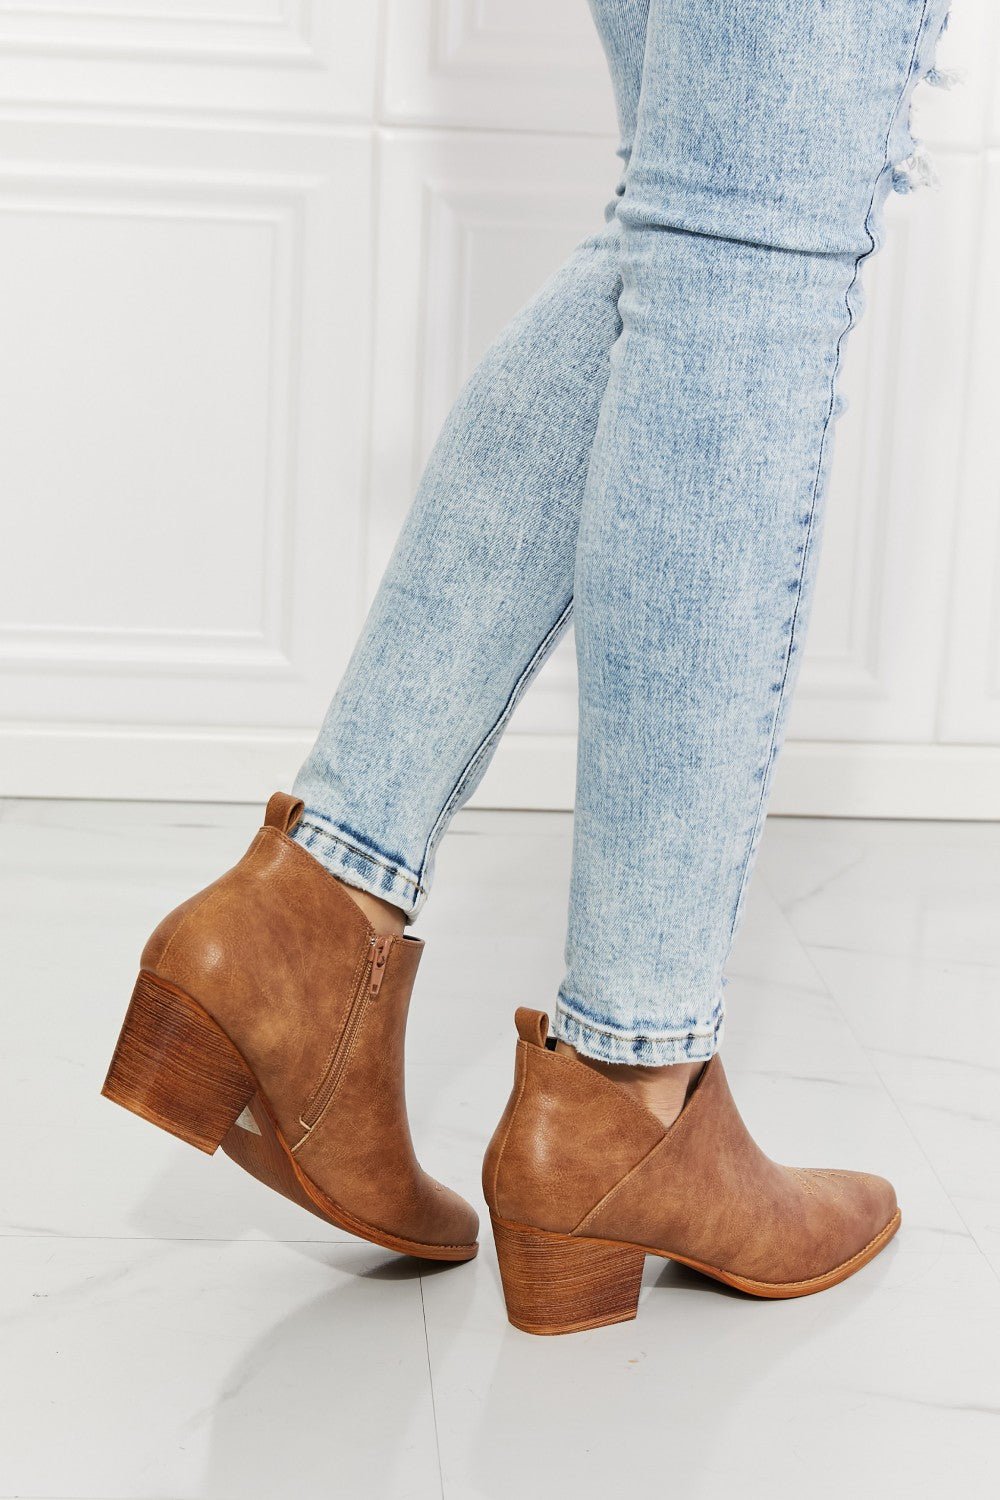 Vegan Leather Cowgirl Ankle Bootie in CaramelBootiesMelody